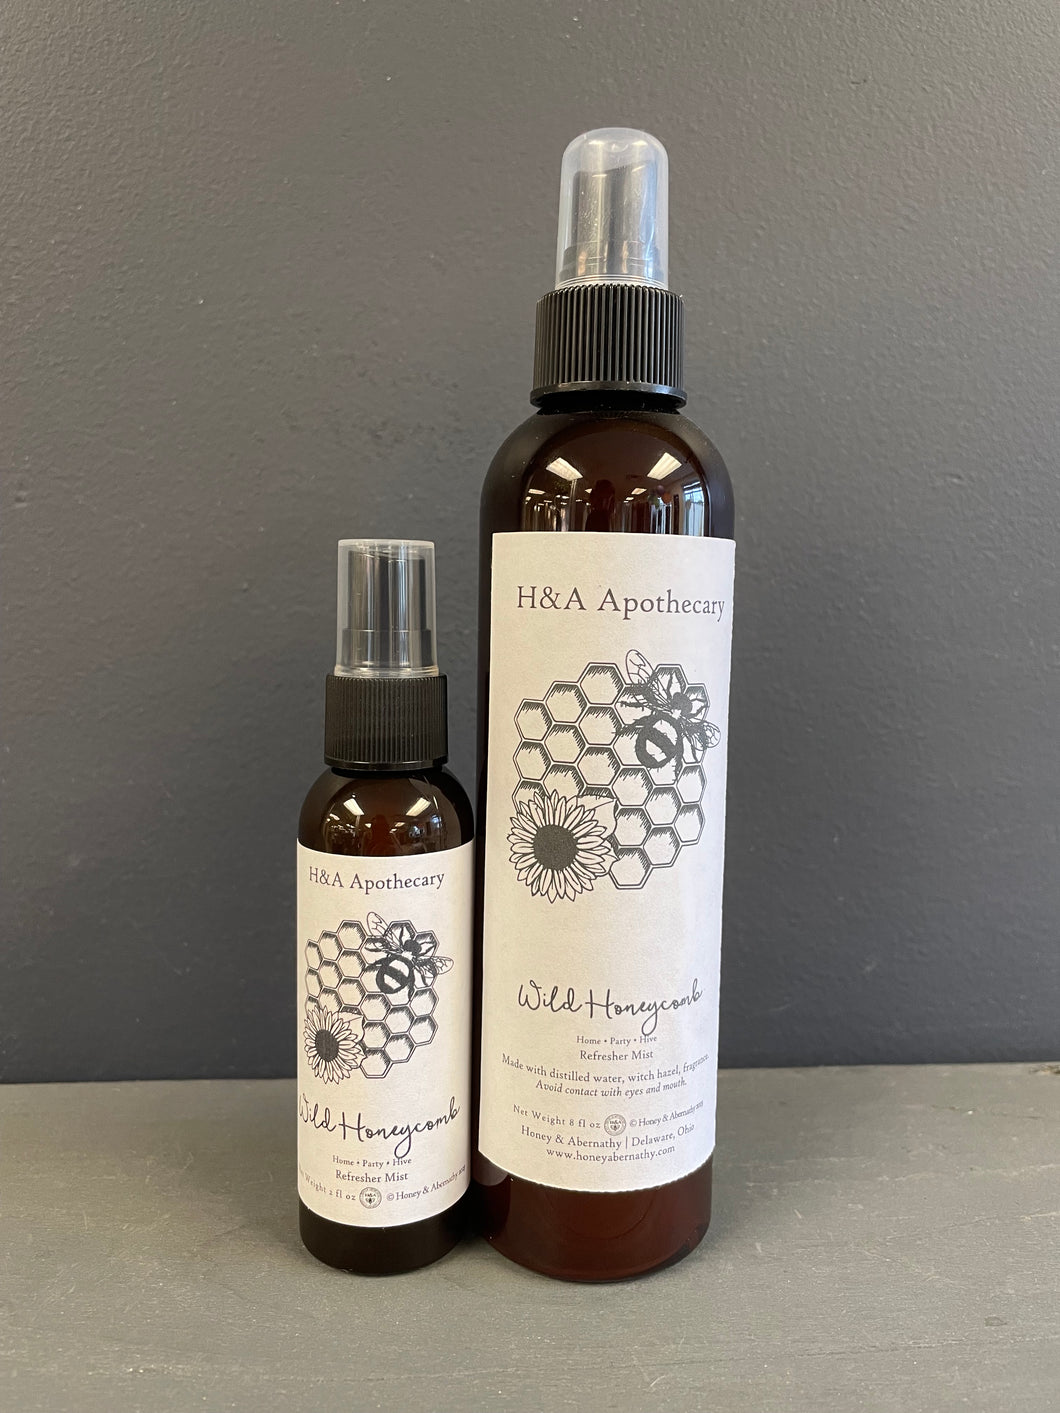 H&A Apothecary Wild Honeycomb Refresher Mist